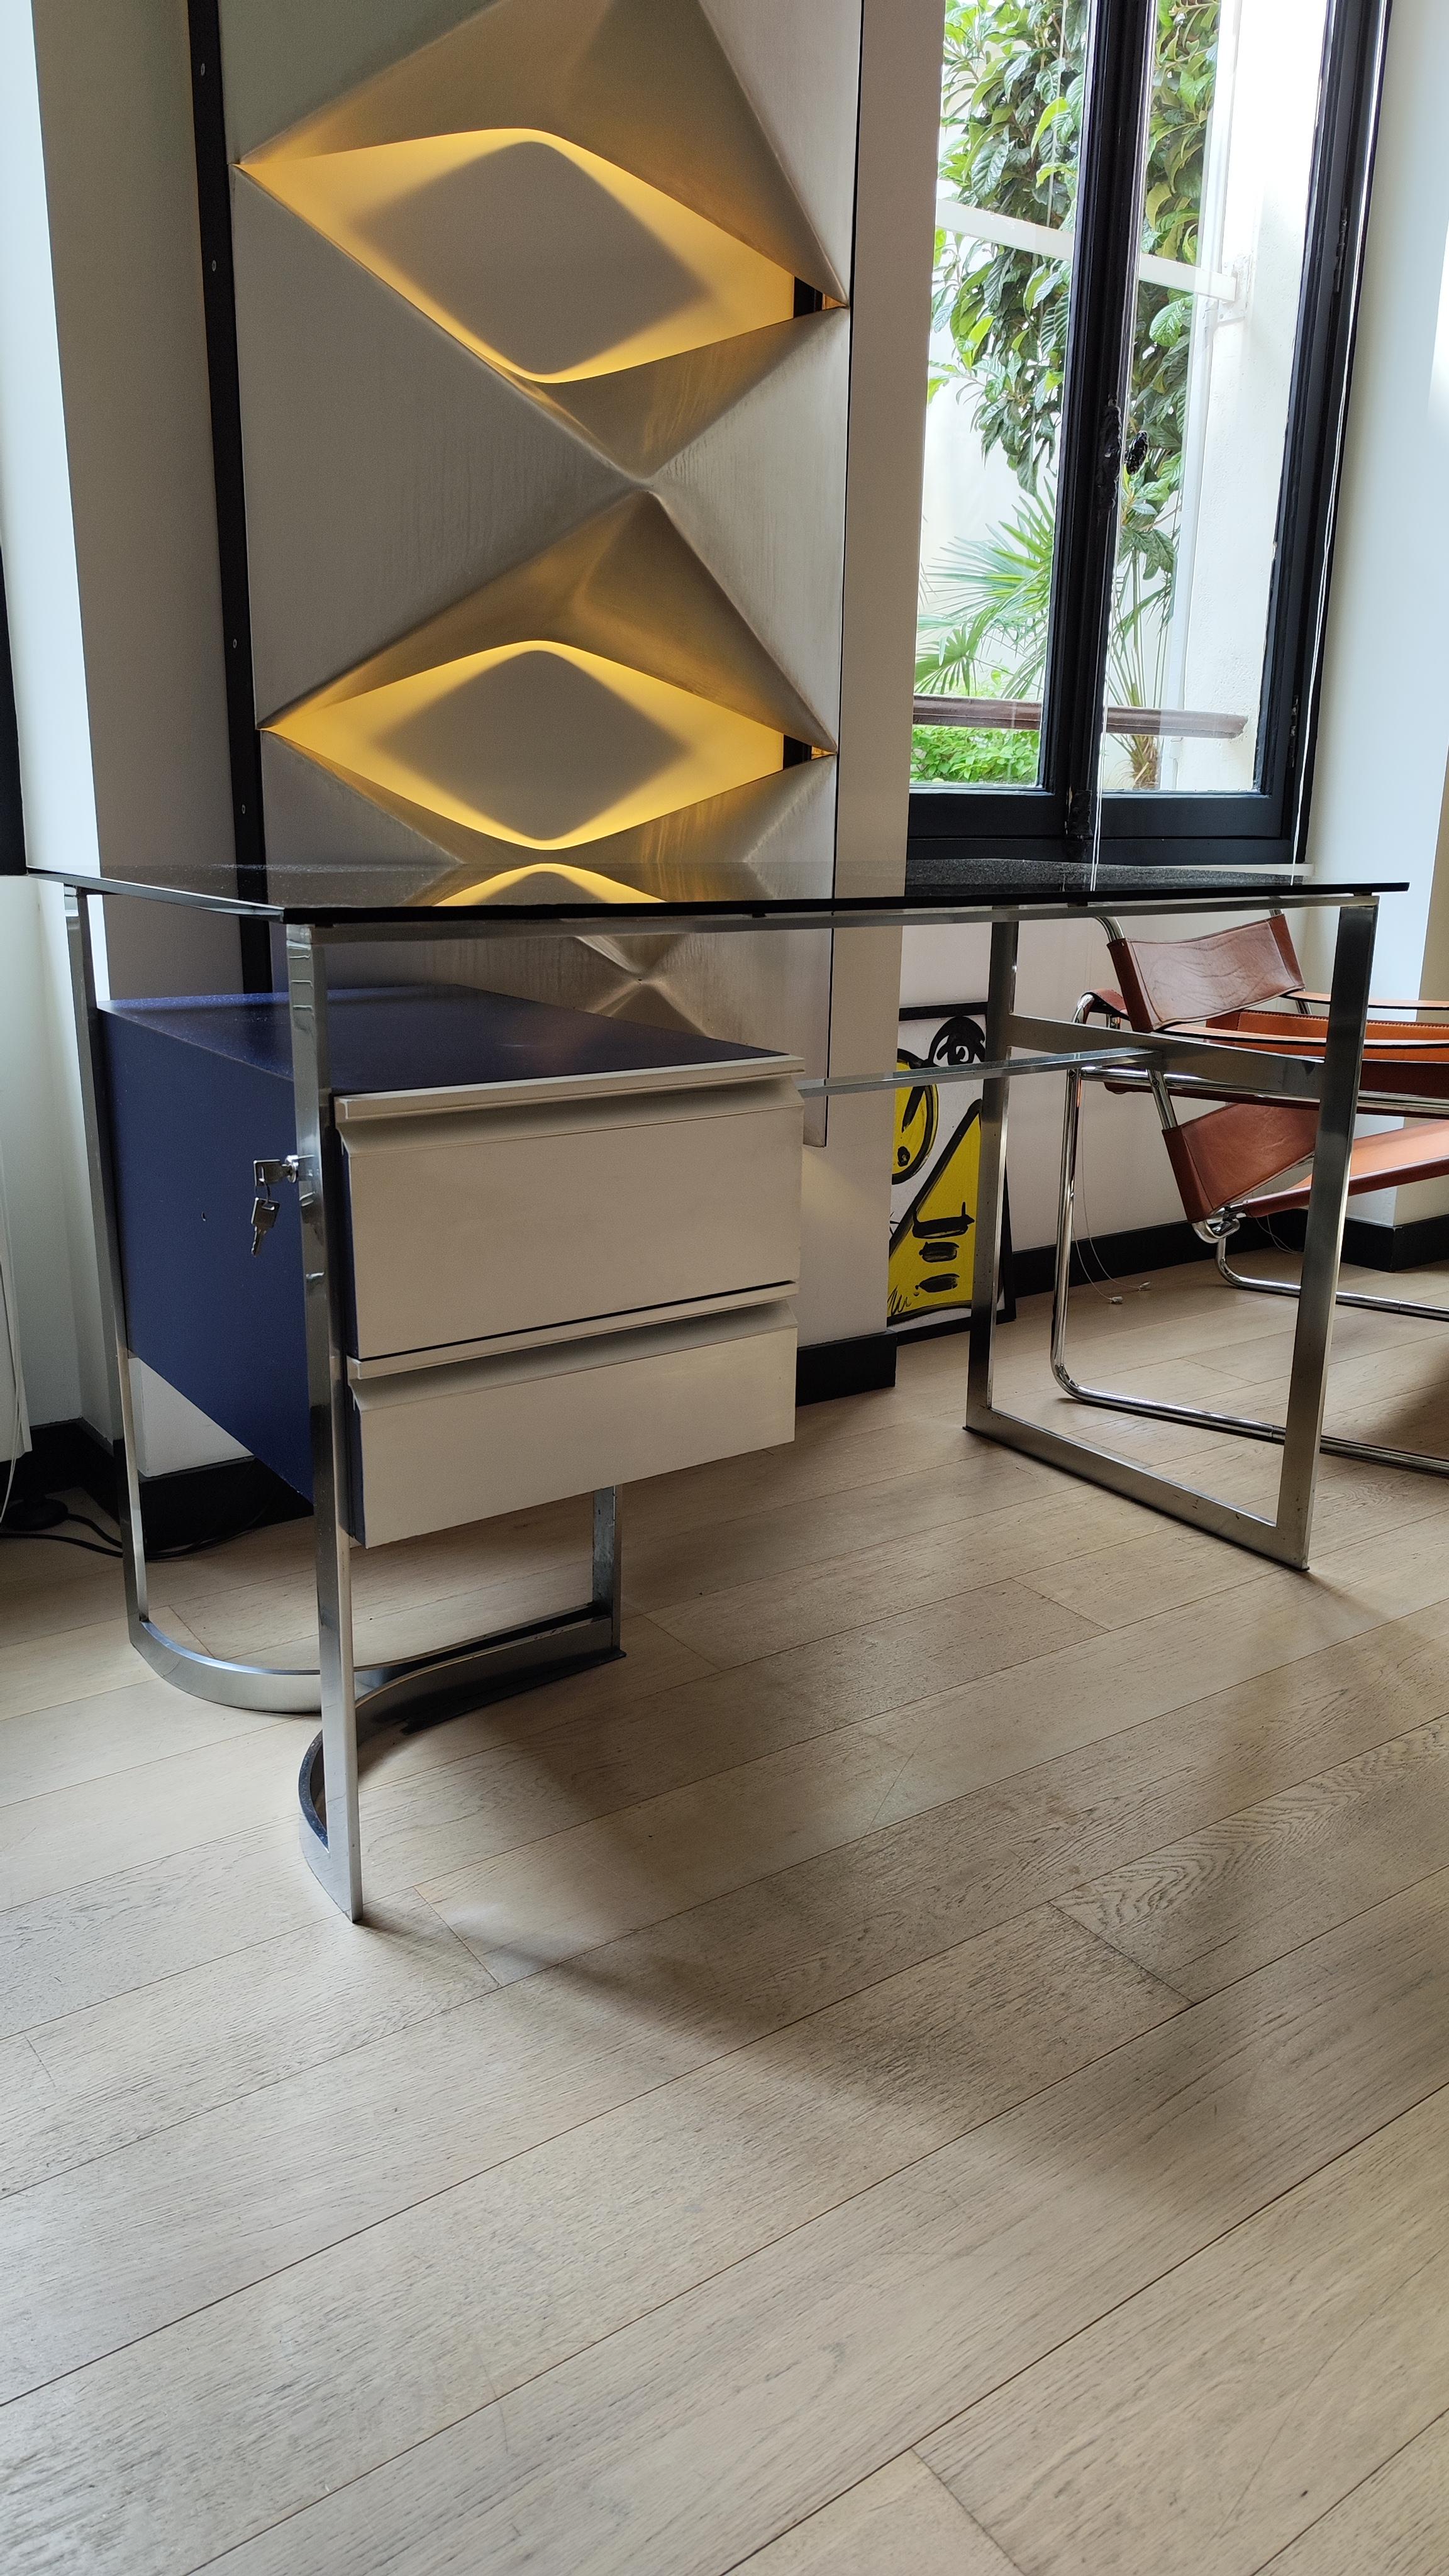 Patrice Maffei Desk for Kappa, 70s, Brushed Stainless Steel, Smoked Glass, 1970 For Sale 1